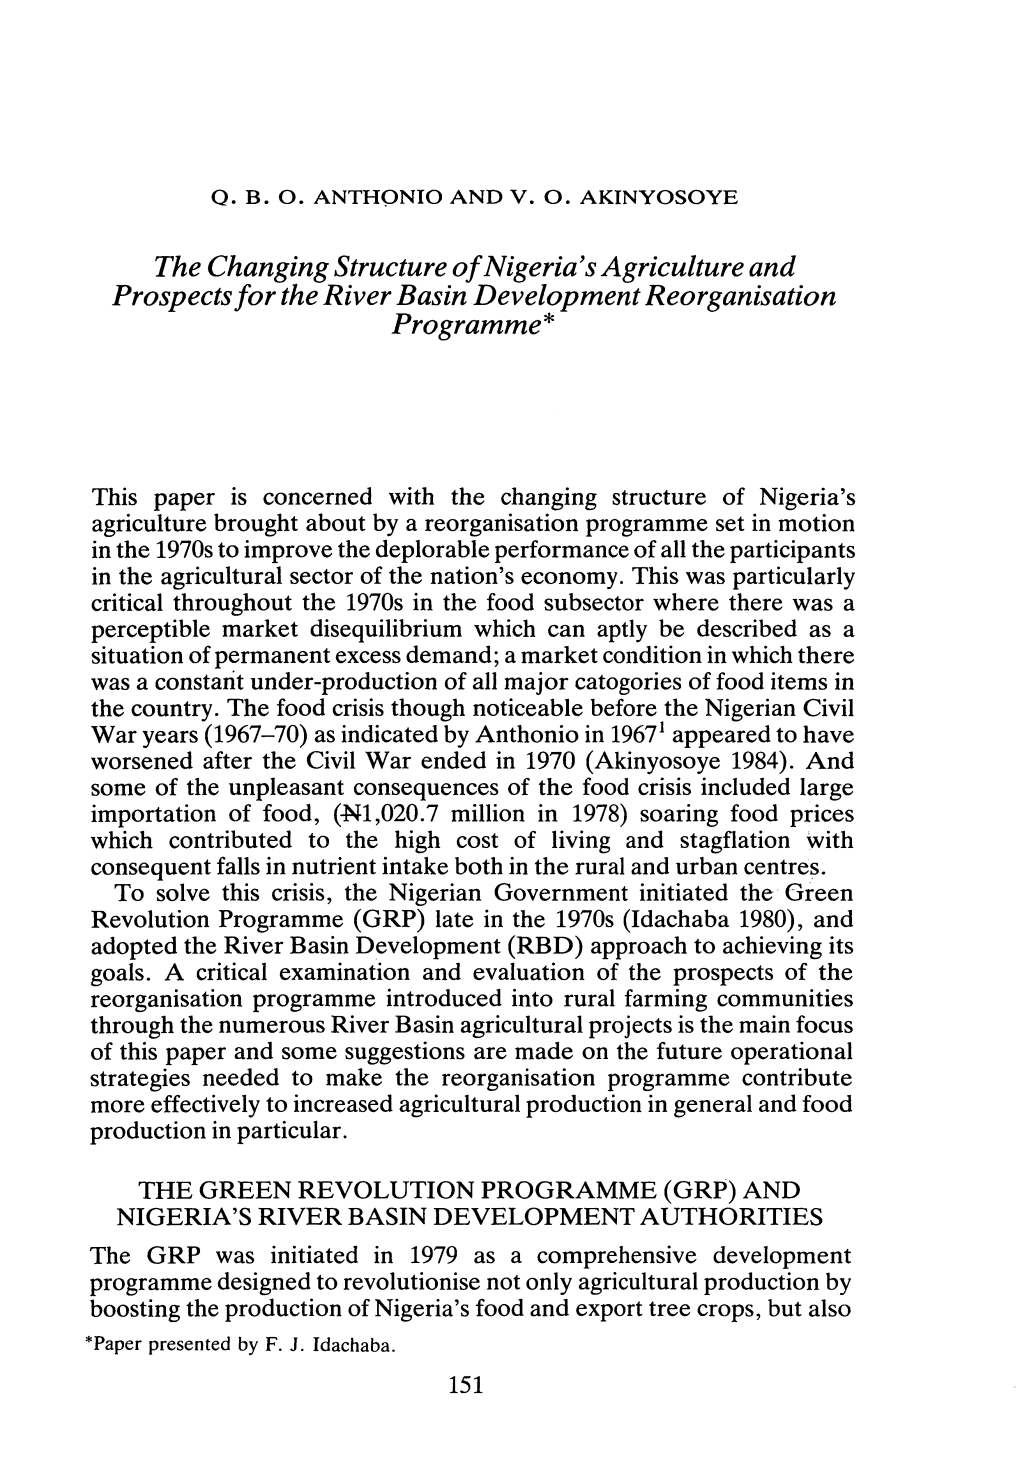 The Changing Structure of Nigeria's Agriculture and Prospects for The